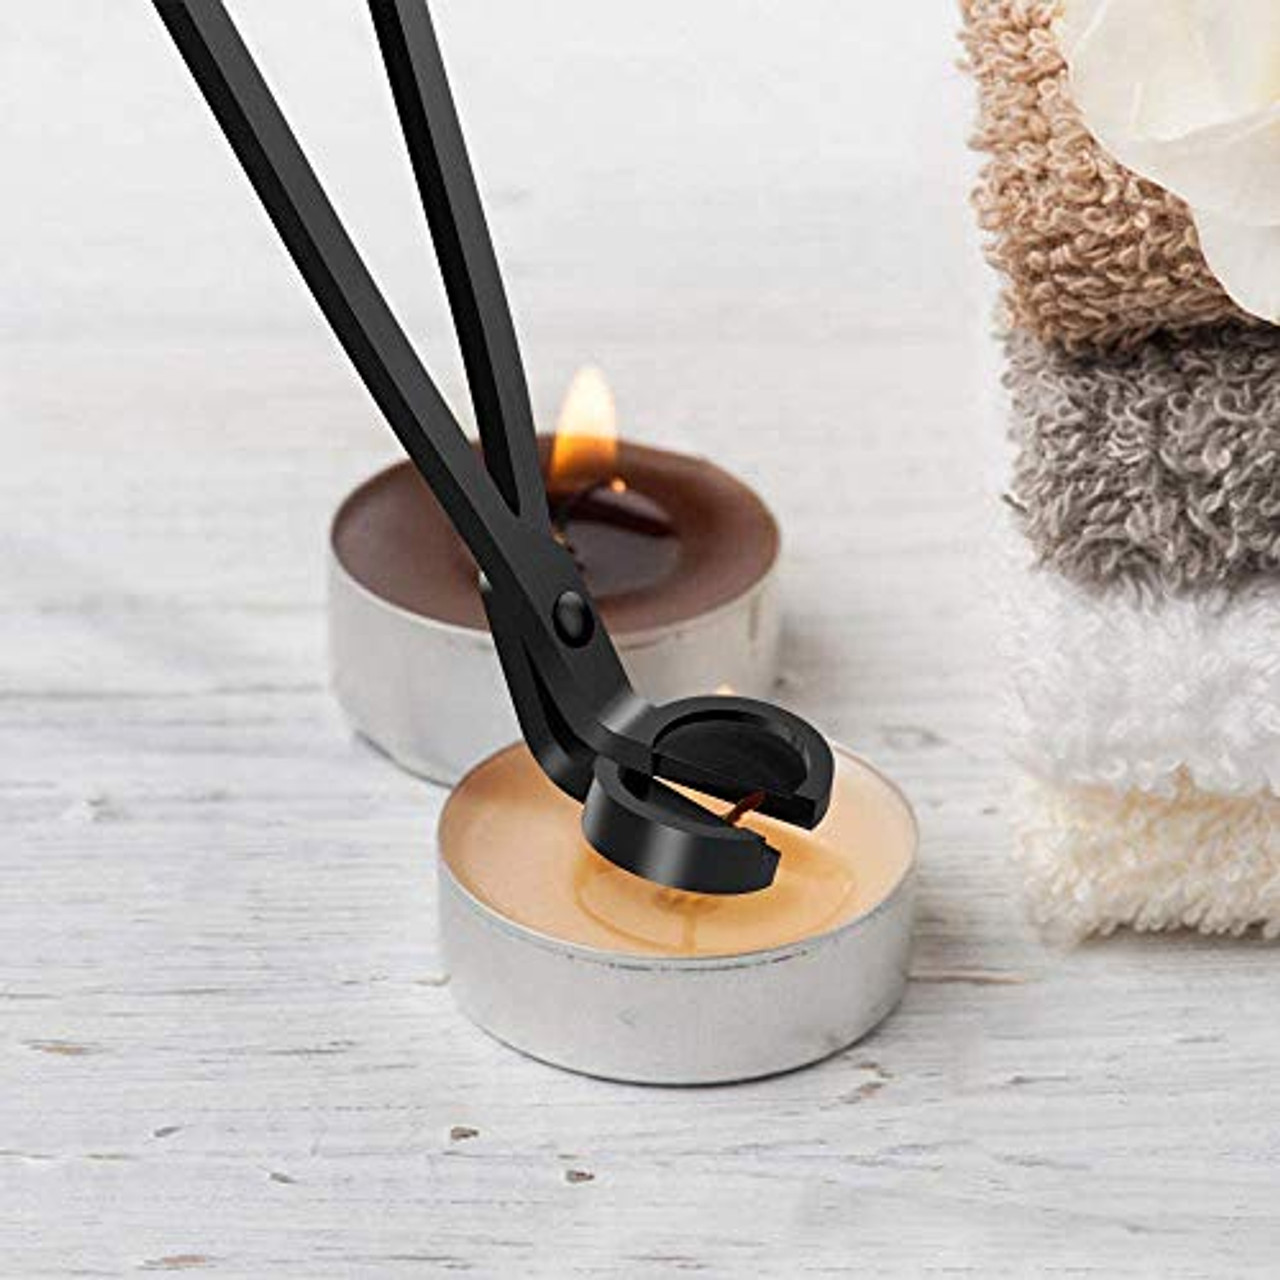 YURROAD 3 in 1 Candle Tools Set, Candle Wick Trimmer, Candle Cutter, Candle  Snuffer, Candle Wick Dipper Accessory Set - Black